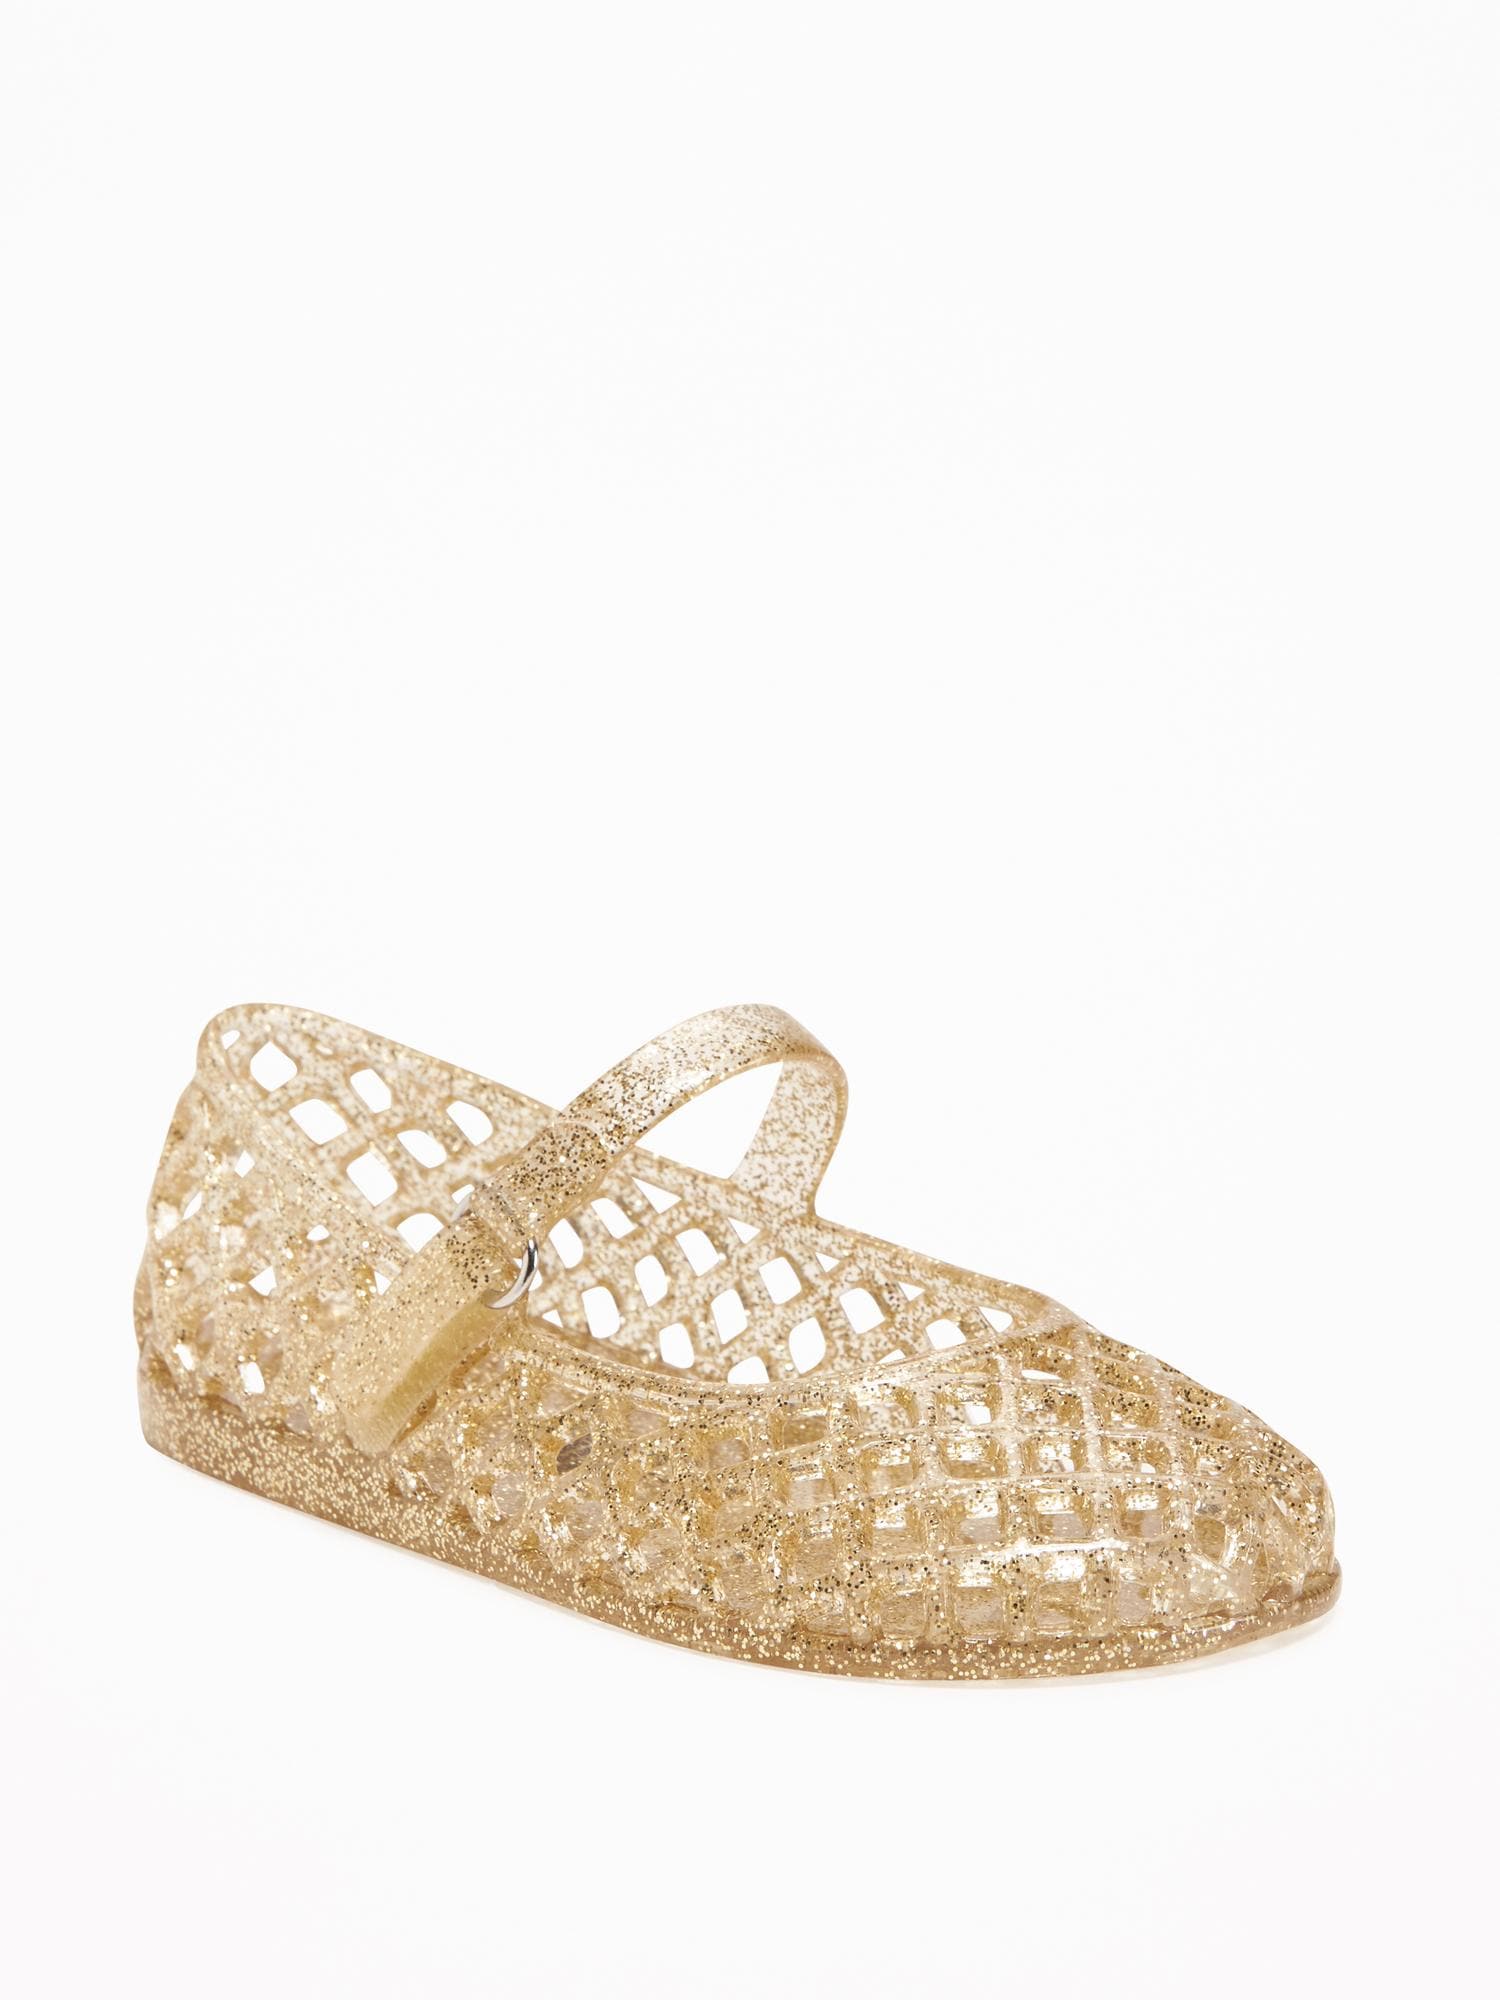 Mary-Jane Jelly Sandals For Toddler Girls | Old Navy